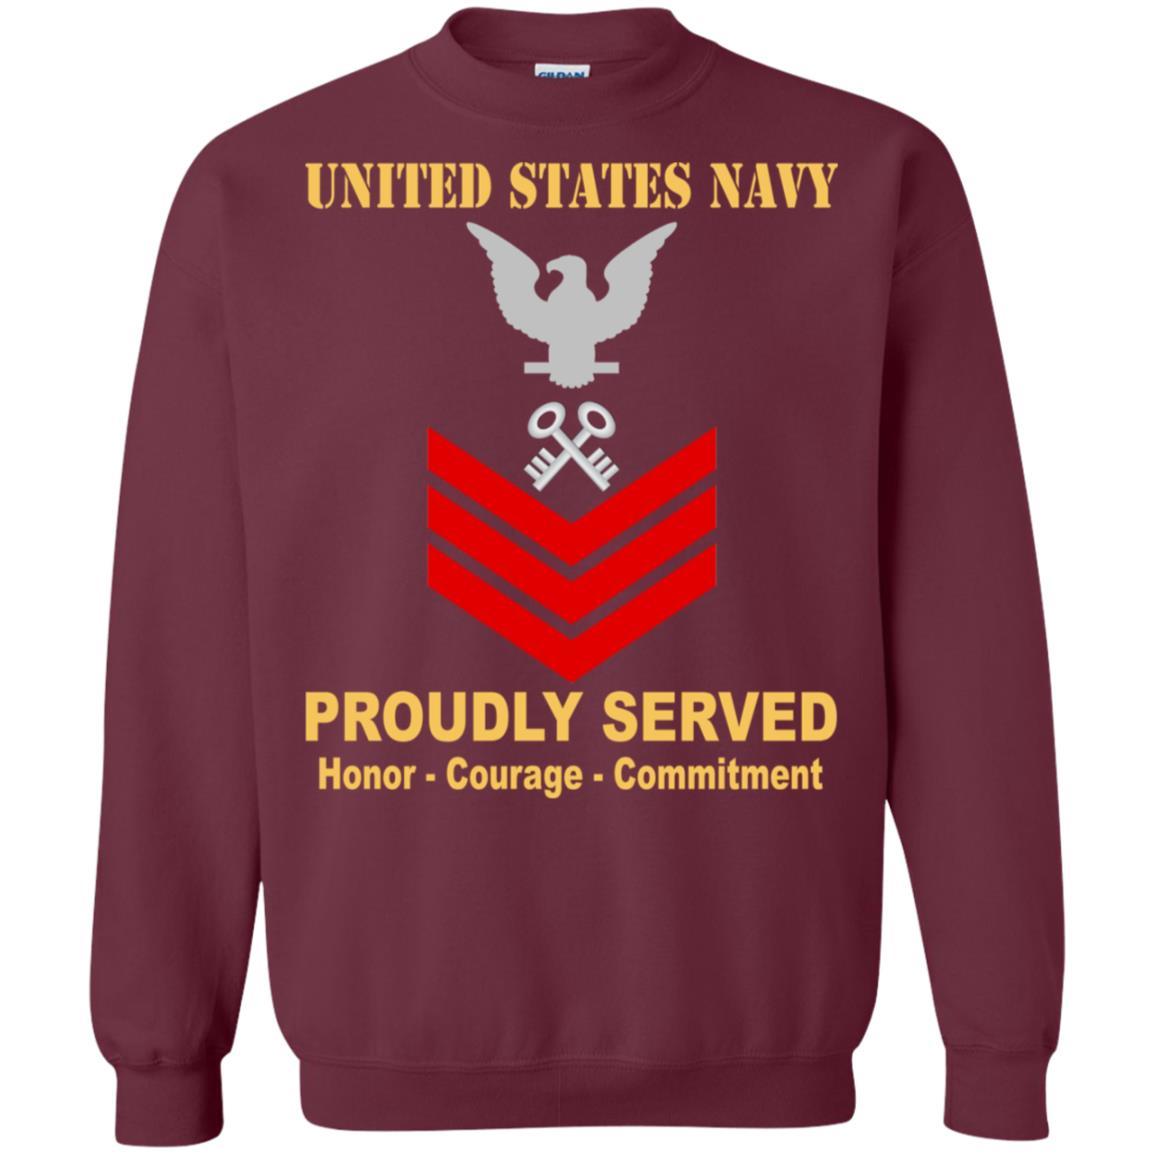 U.S Navy Logistics specialist Navy LS E-6 Rating Badges Proudly Served T-Shirt For Men On Front-TShirt-Navy-Veterans Nation